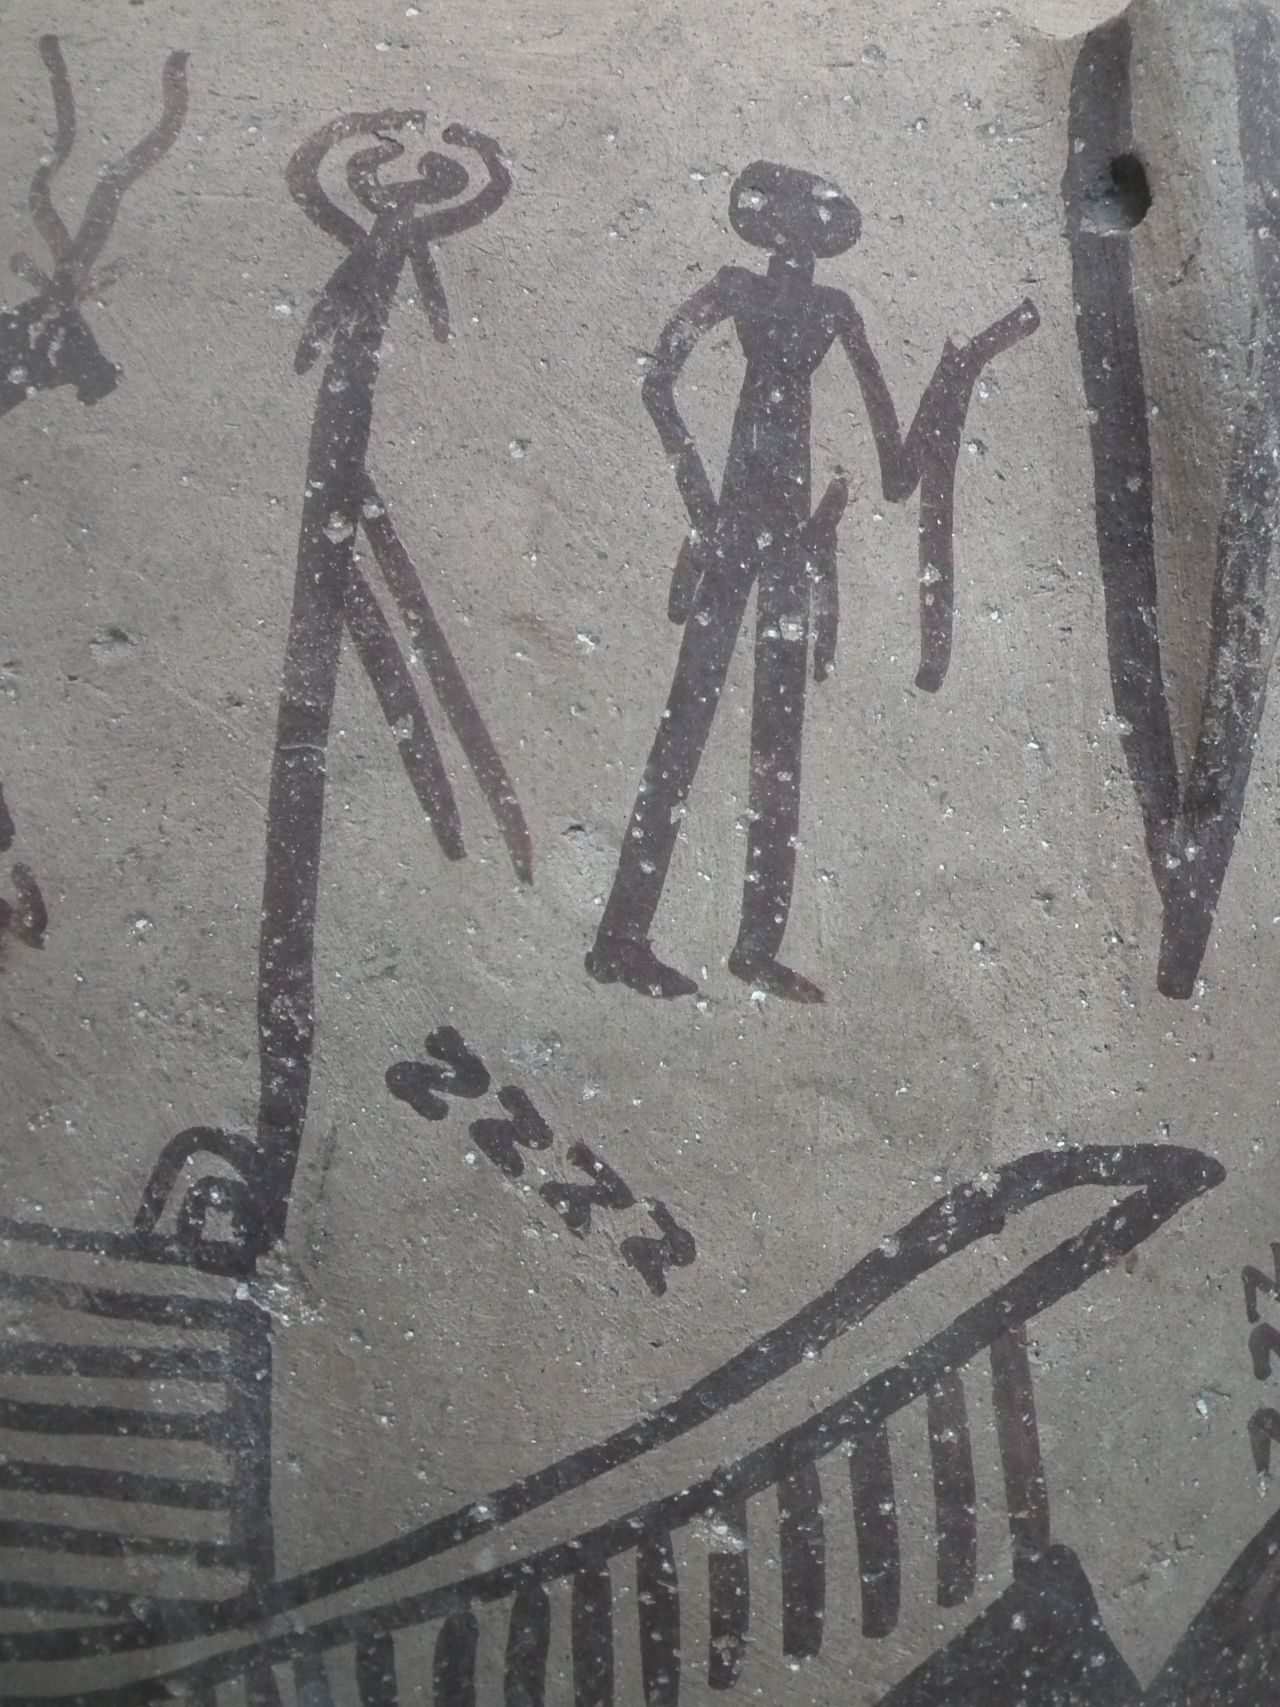 A ritual scene painted on a Predynastic pottery jar depicts multiple S-motifs and a<br />man holding a curved implement, perhaps a crooked stave -- which is thought to be a symbol of power and status. Similar shapes were tattooed on the female mummy.